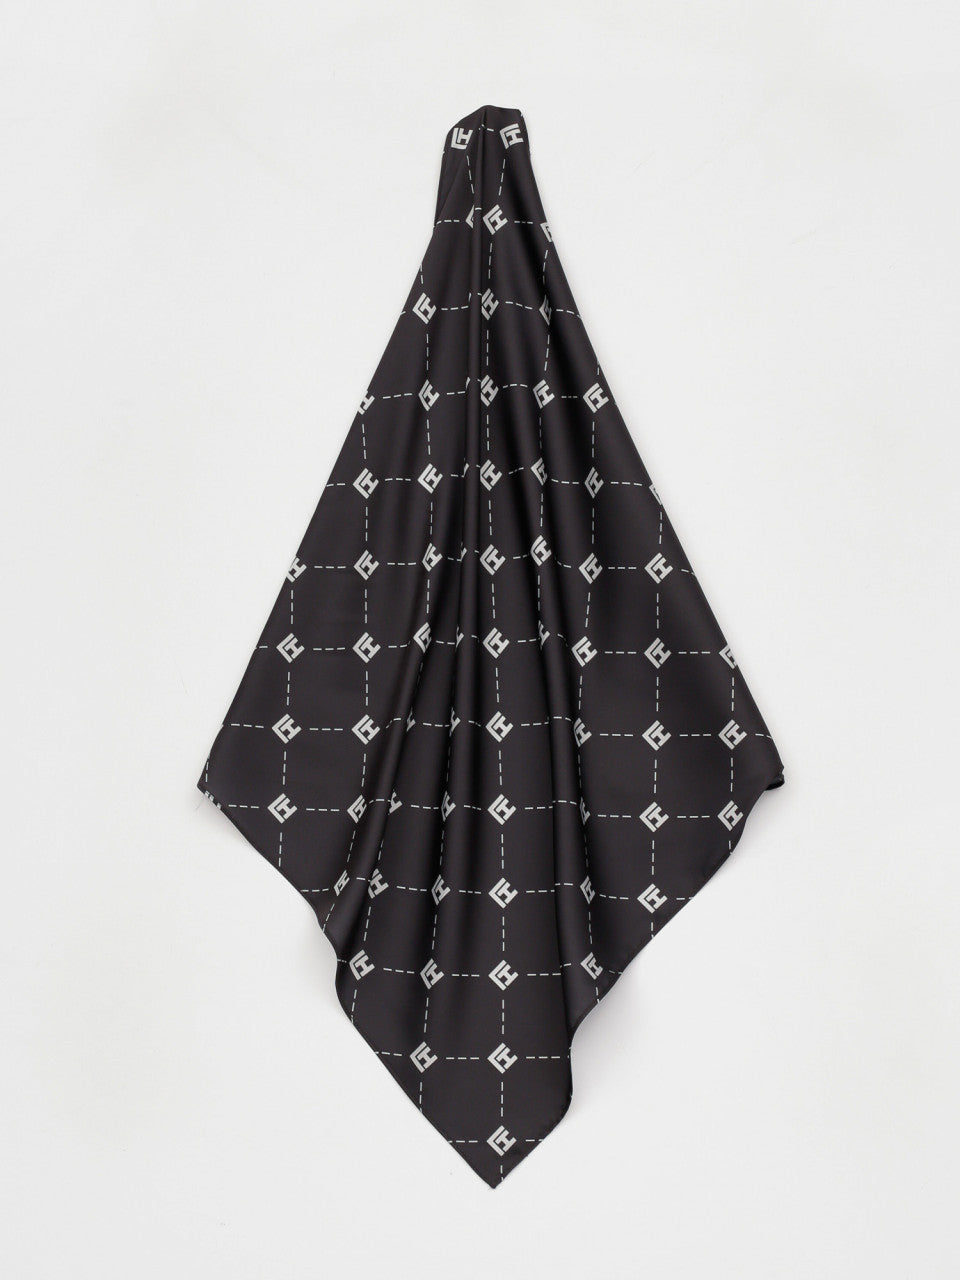 LH MONOGRAM BANDANA - BLACK - EXCLUSIVE Bandana / scarf from LOCAL HEROES - Just $22.00! SHOP NOW AT IAMINHATELOVE BOTH IN STORE FOR CYPRUS AND ONLINE WORLDWIDE